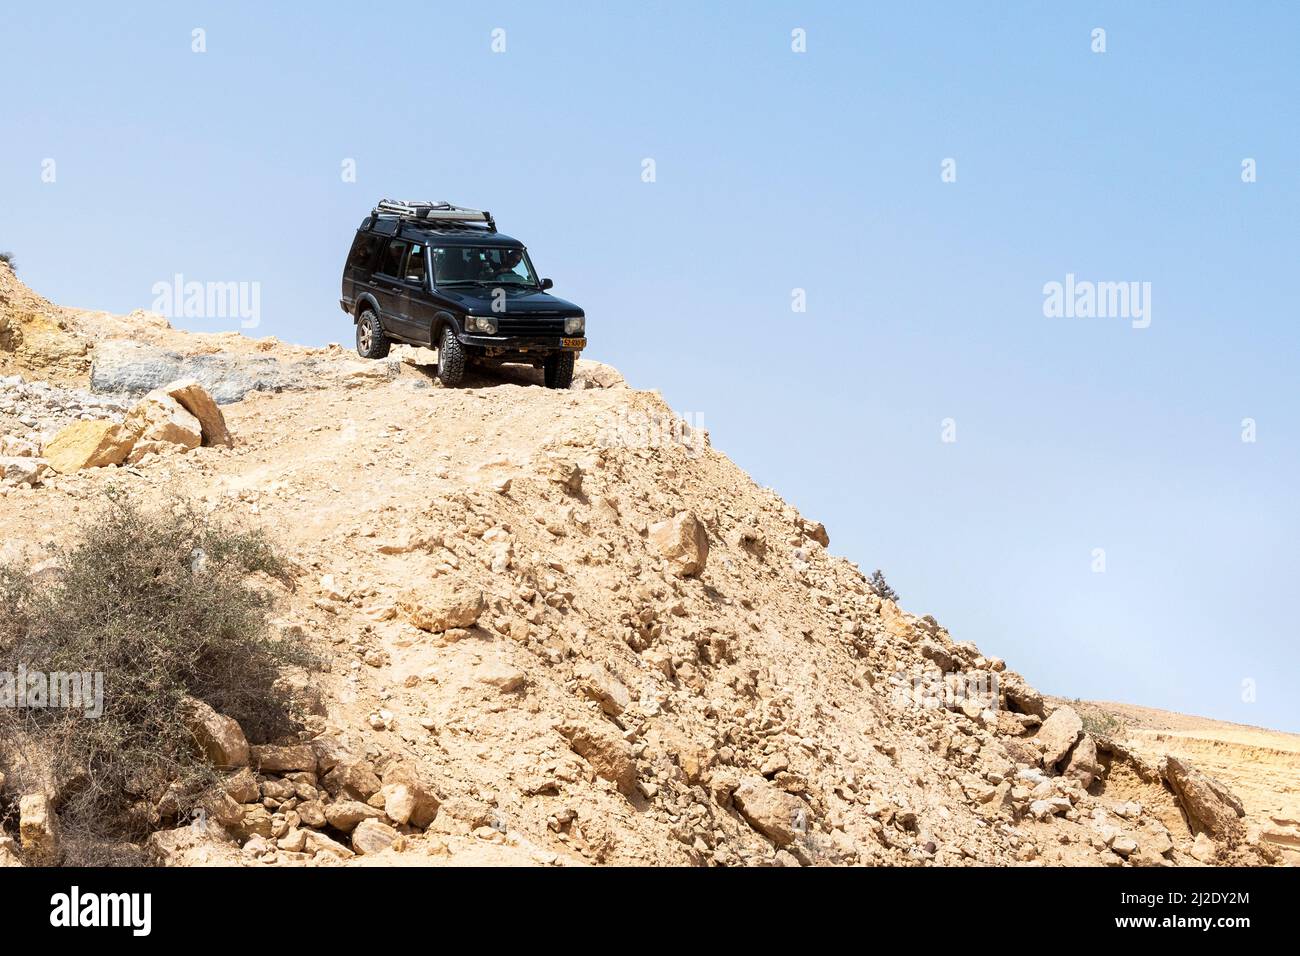 off road SUV jeep-type vehicle maneuvering down a steep descent on a barren desert mountain with a clear blue sky background Stock Photo